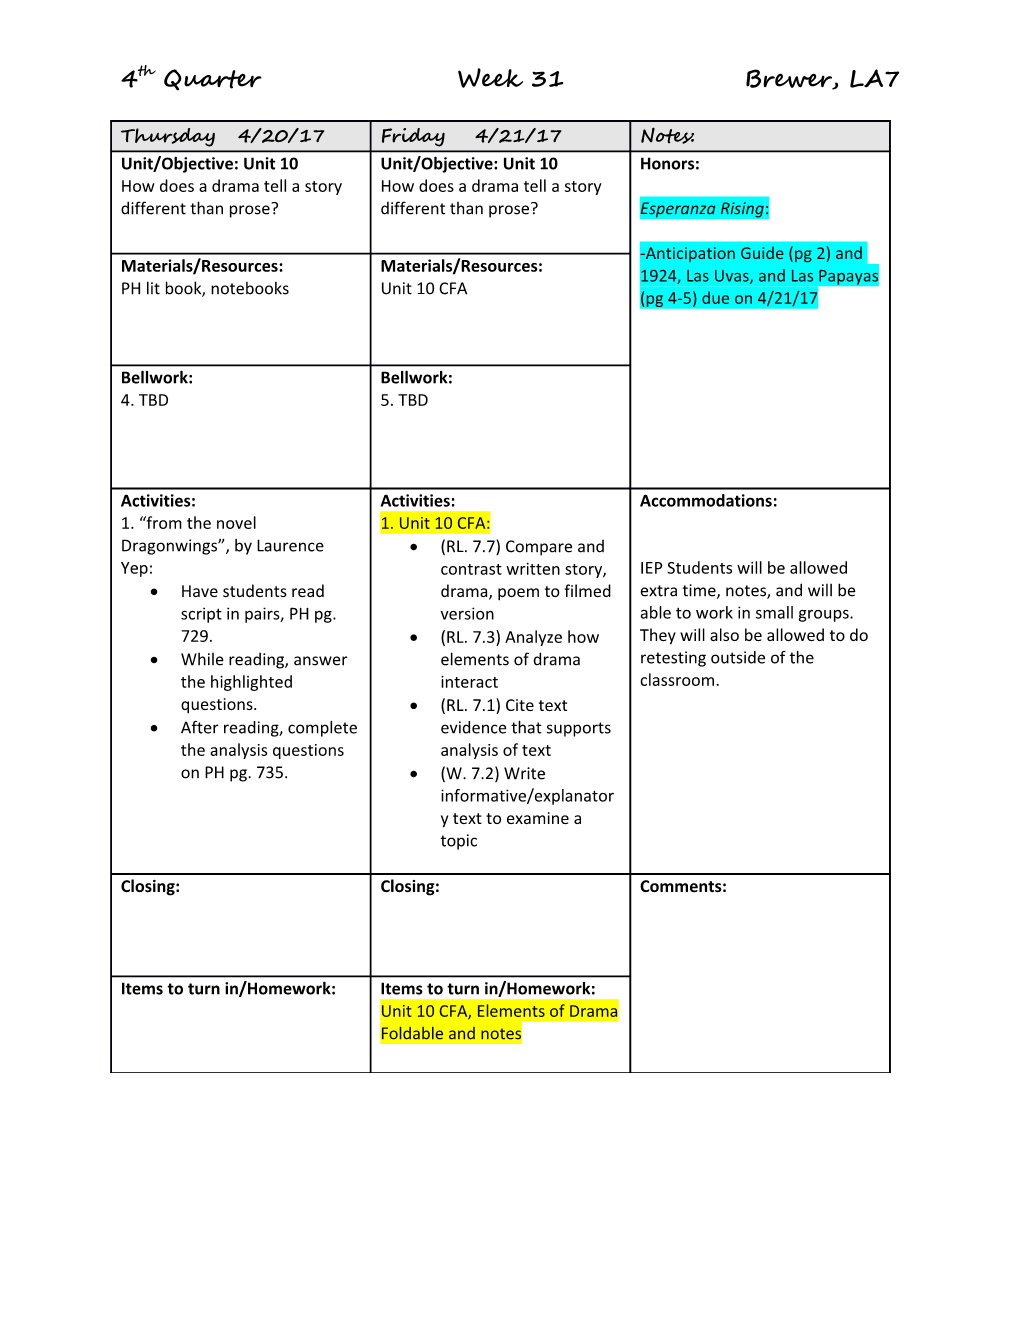 Create Drama Terms Foldable and Notes from Pages 722-725 in PH Lit Book